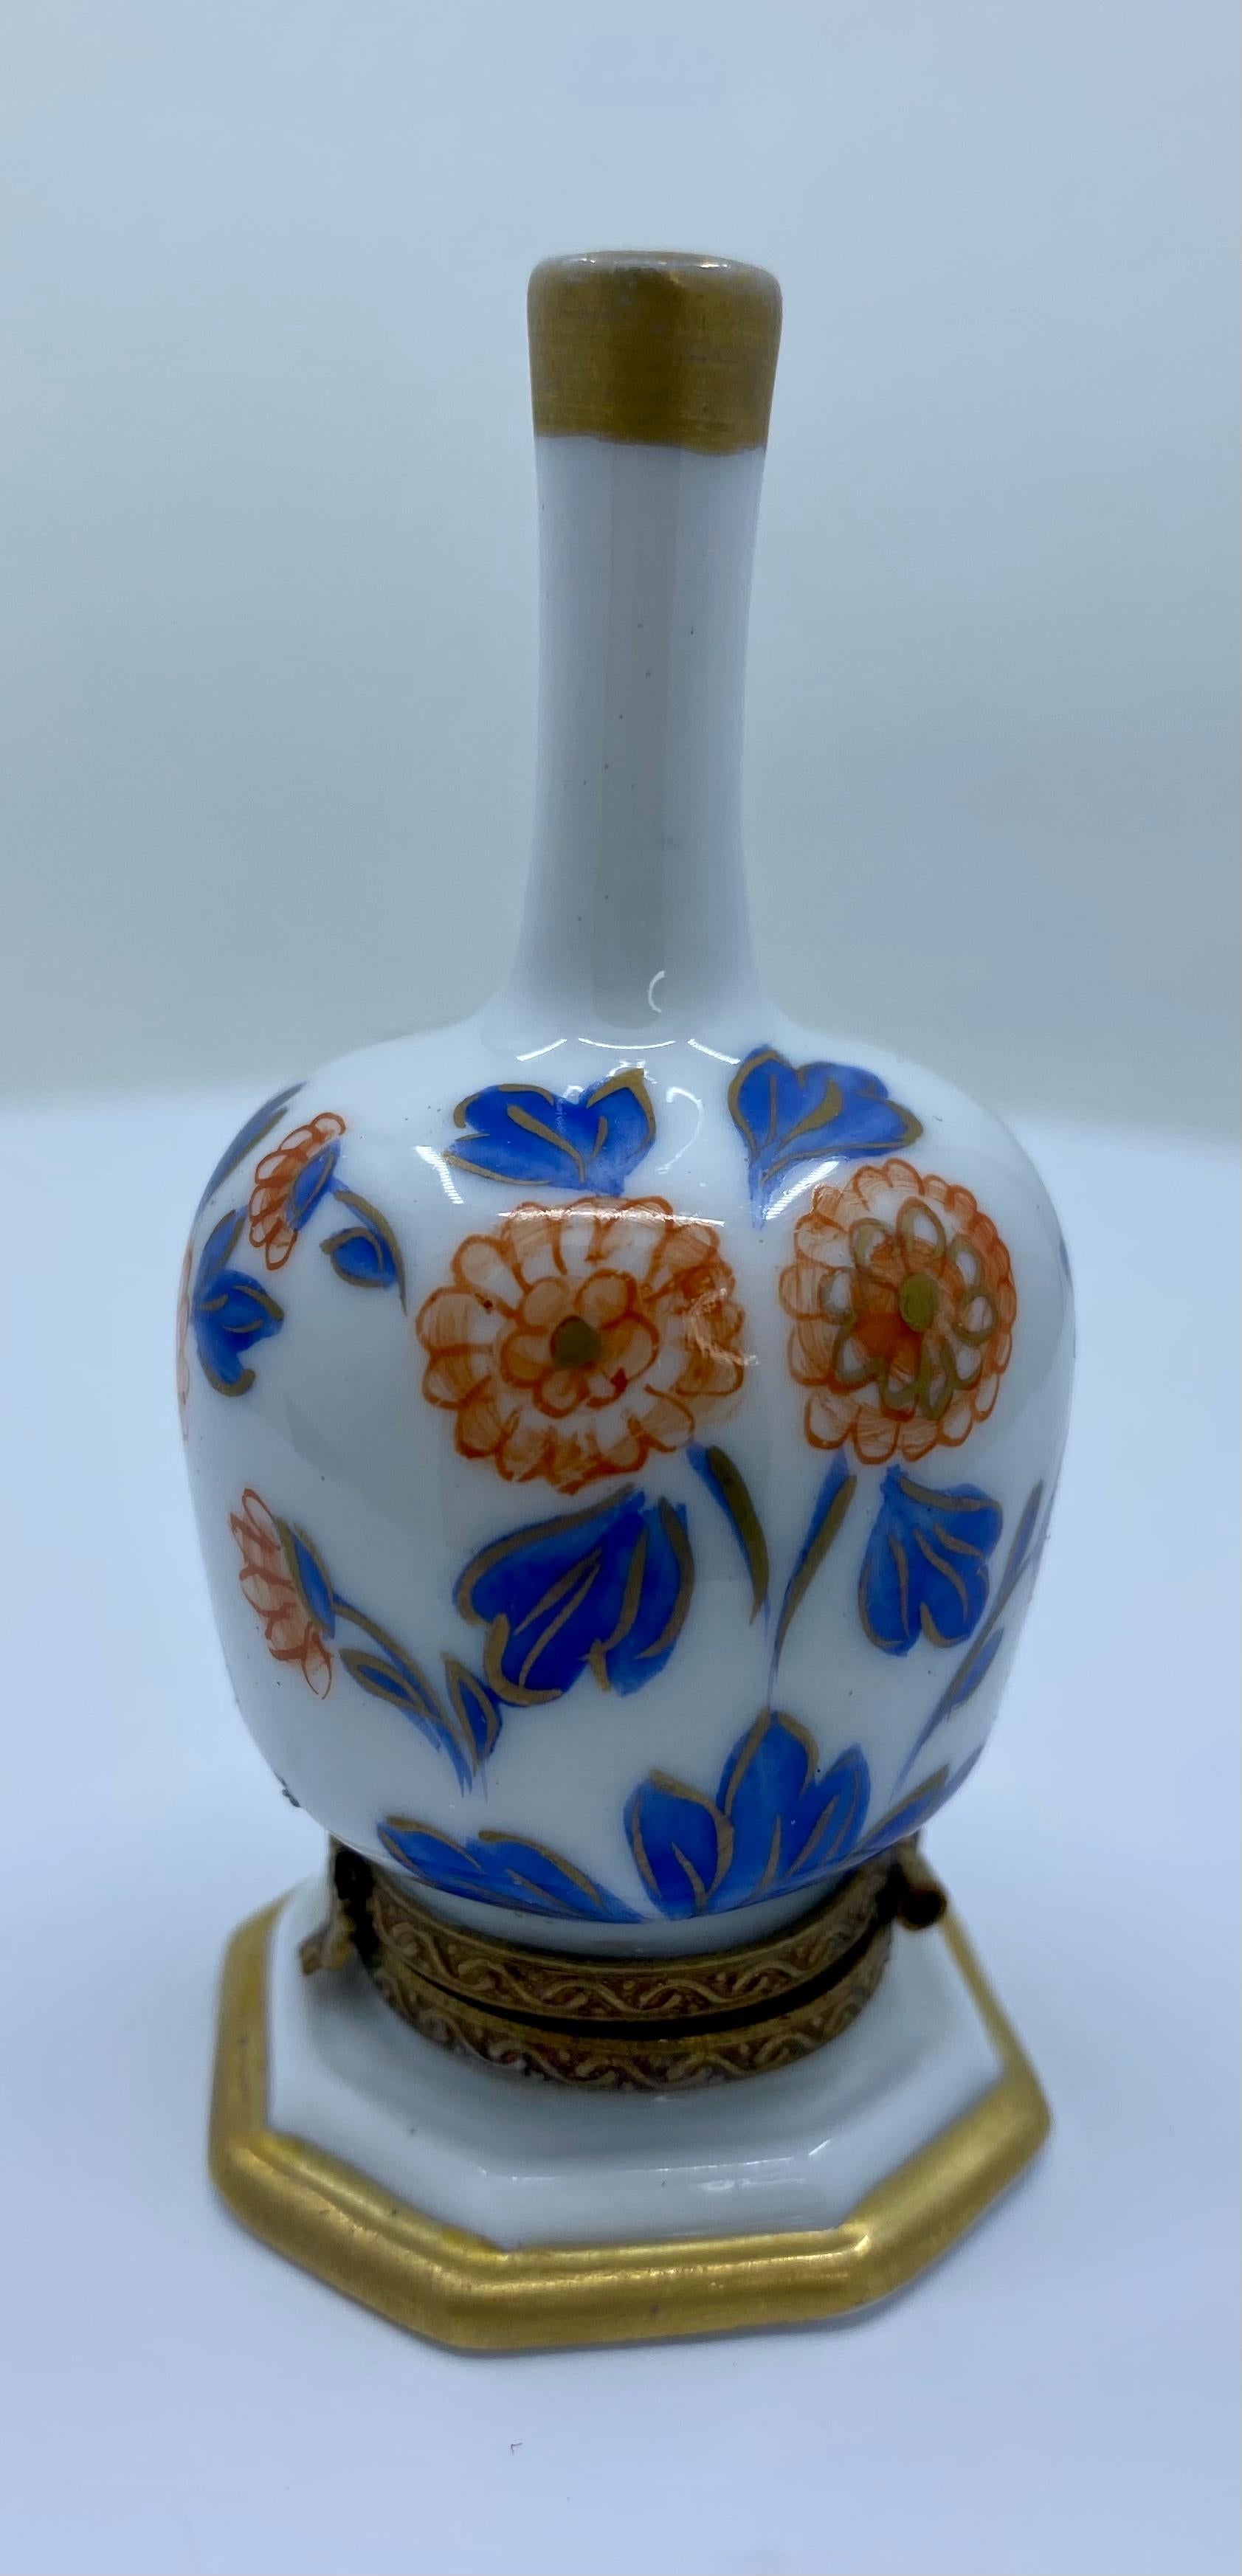 Collectible and very unique, Limoges porcelain miniature trinket box is handmade and hand painted in France. It features beautiful blue and orange tone flowers and leaves with touches of gold covering the long neck vase shaped box. Accenting the box